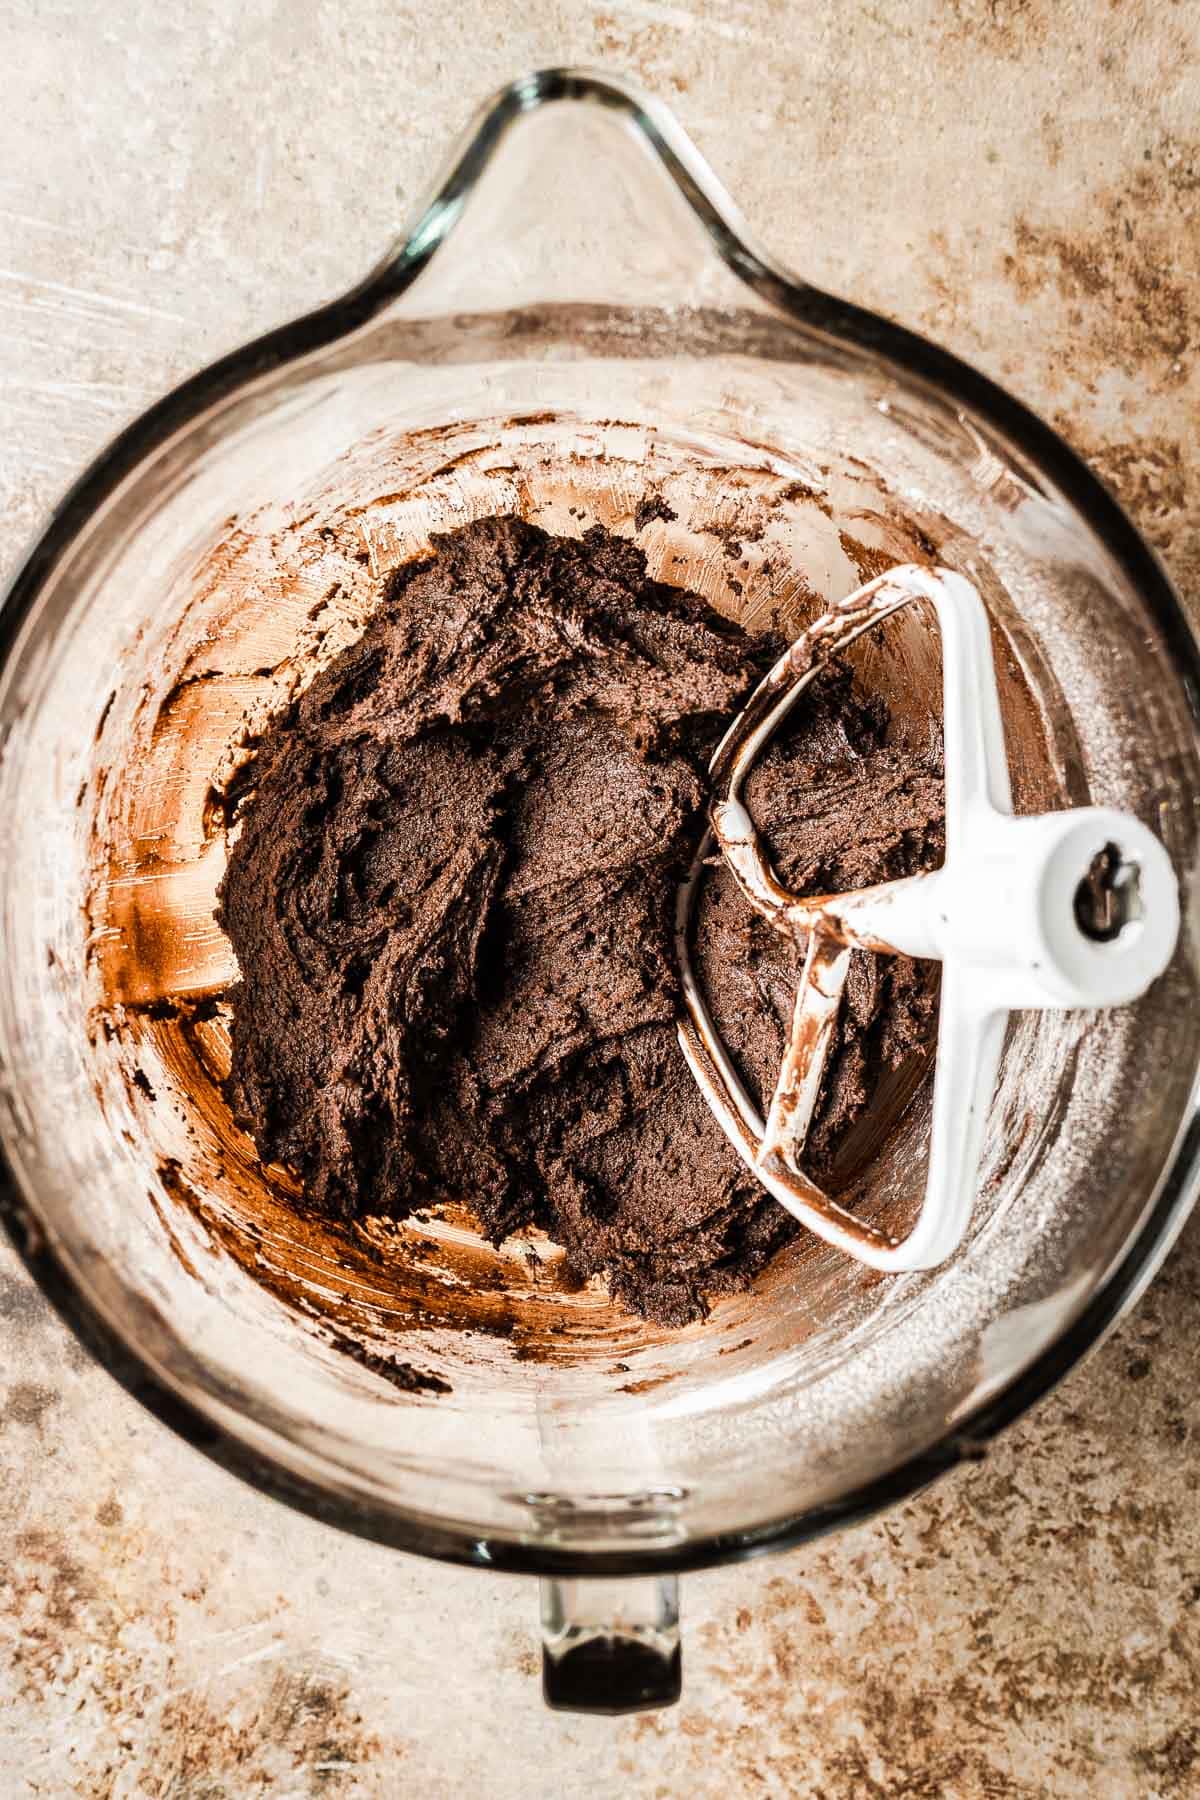 A mixing bowl of finished chocolate gingerbread cookie dough.